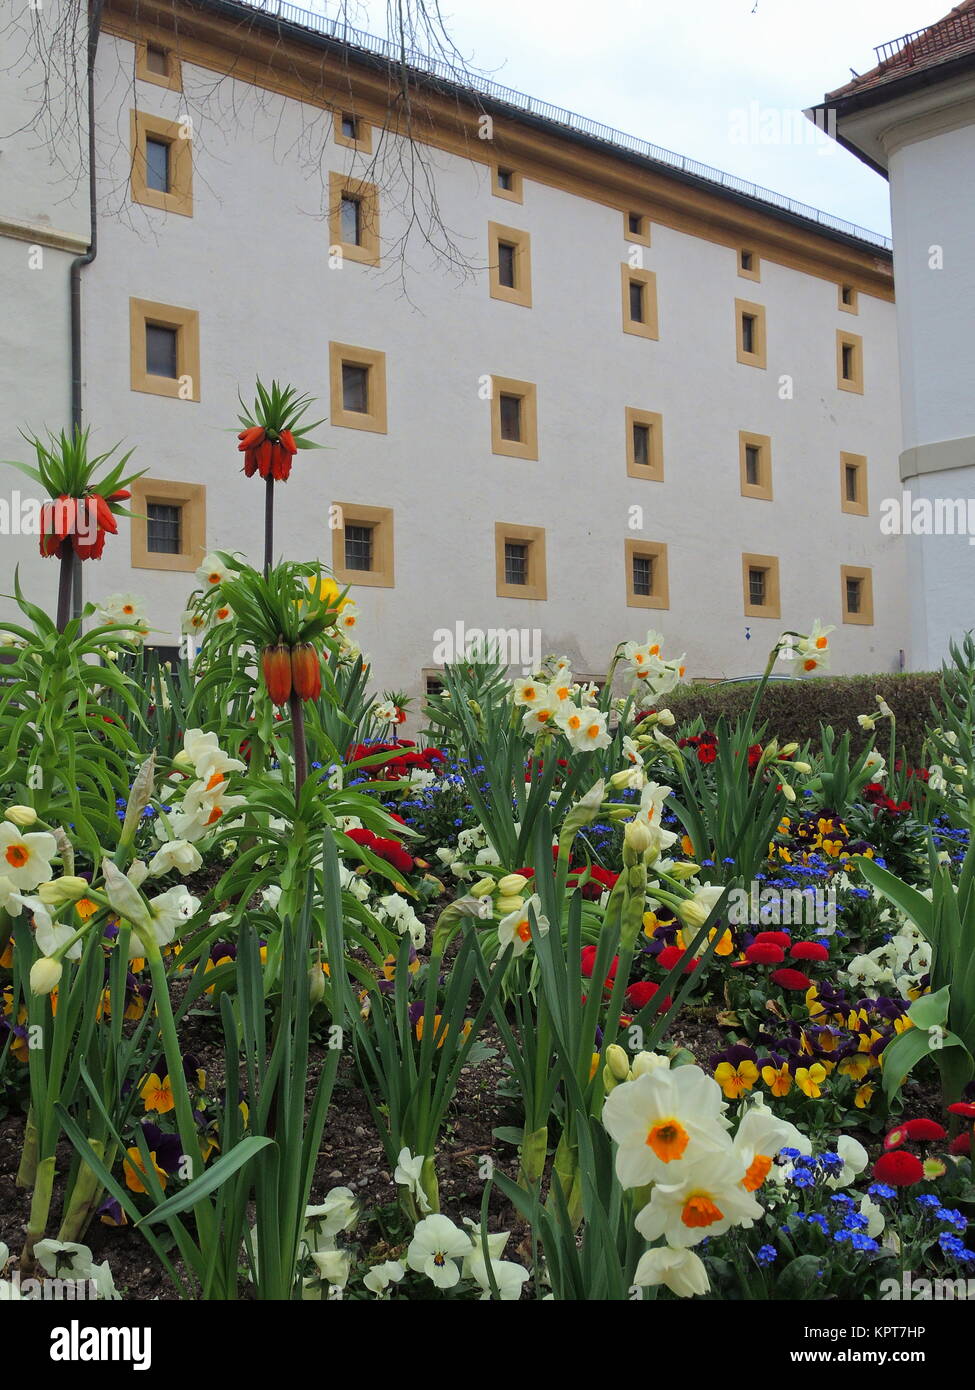 Variety of flowers in front of old houses Stock Photo